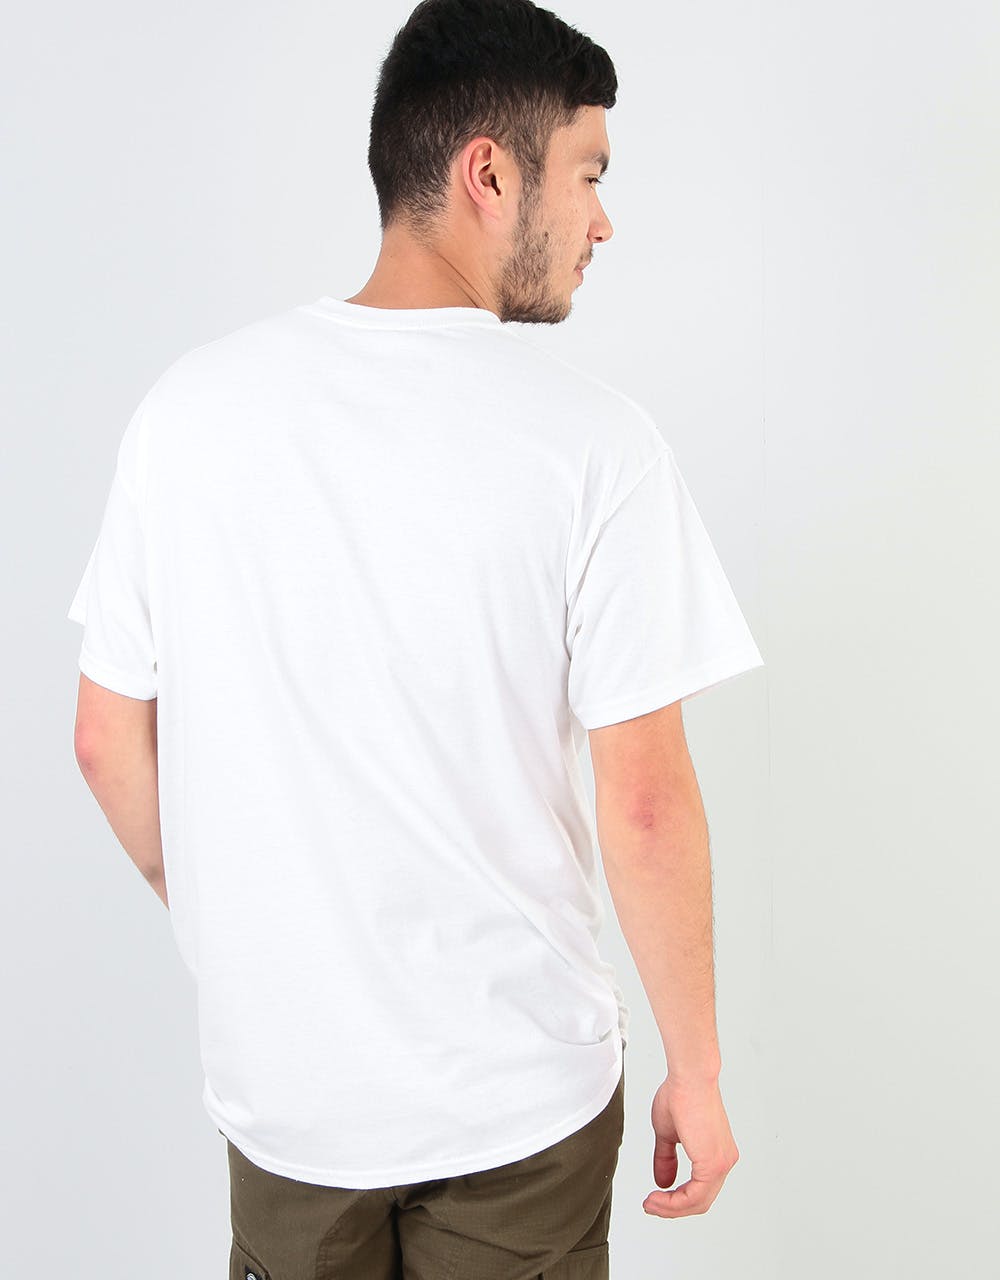 Route One Solidarity T-Shirt - White